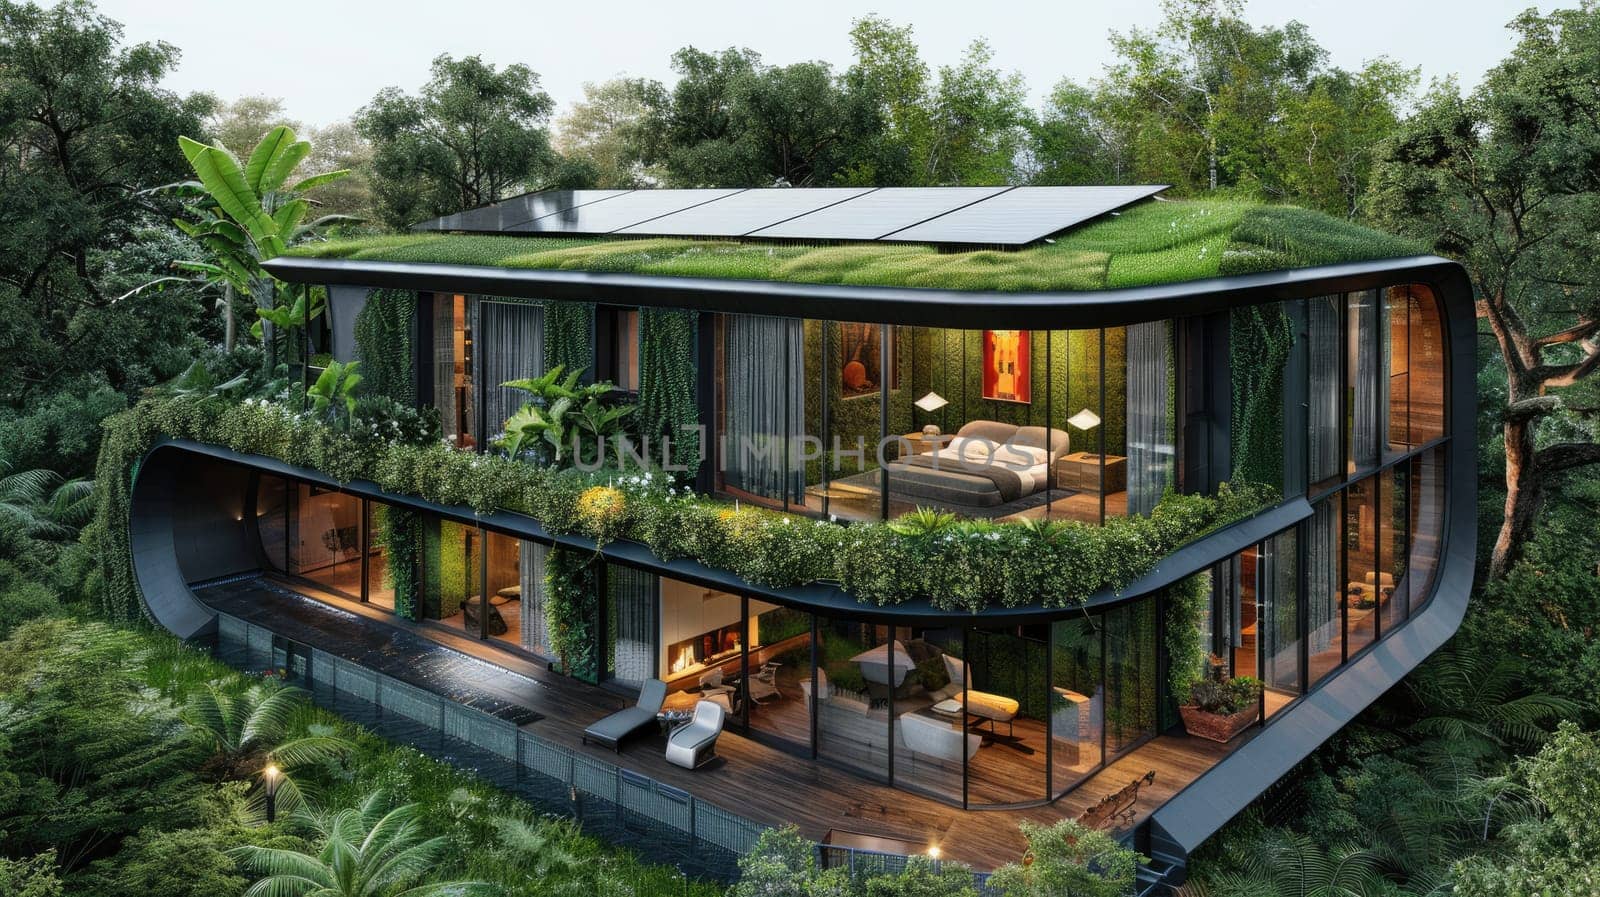 Modern Eco-Friendly Home with Green Roof, Solar Panels, and Sustainable Garden Views.